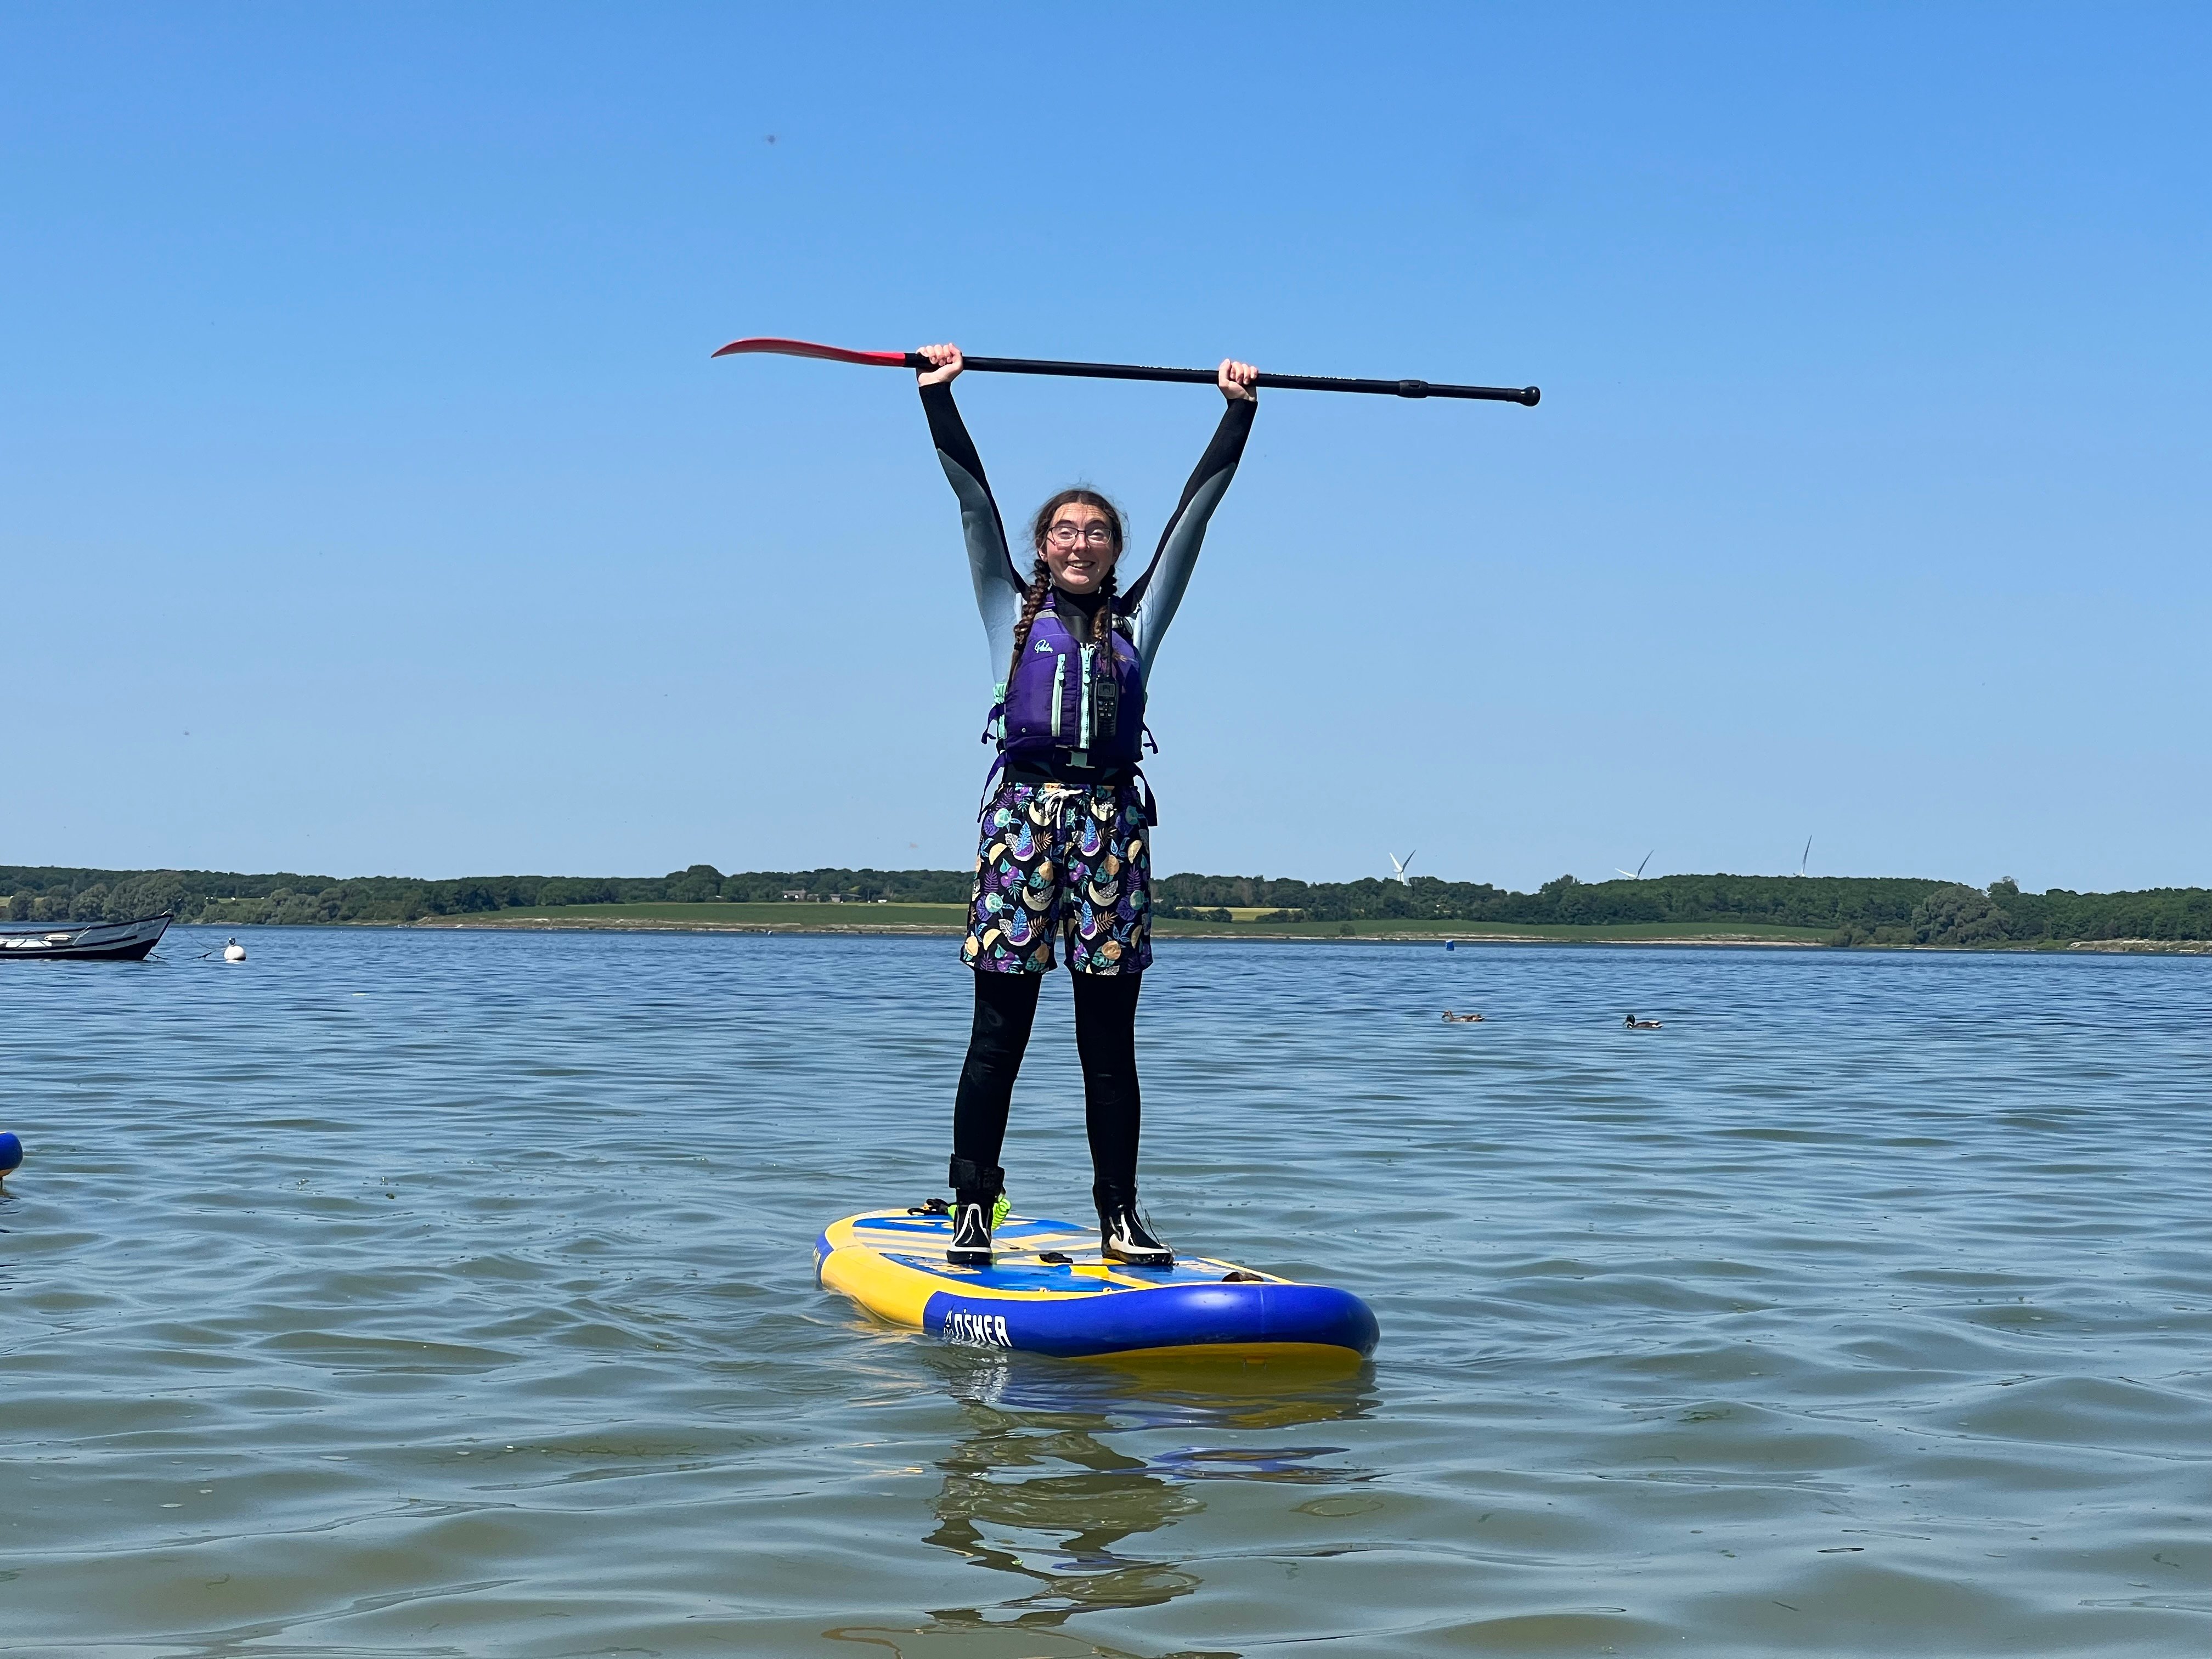 Grafham Water Centre - personal development, achievement and fun with water sports